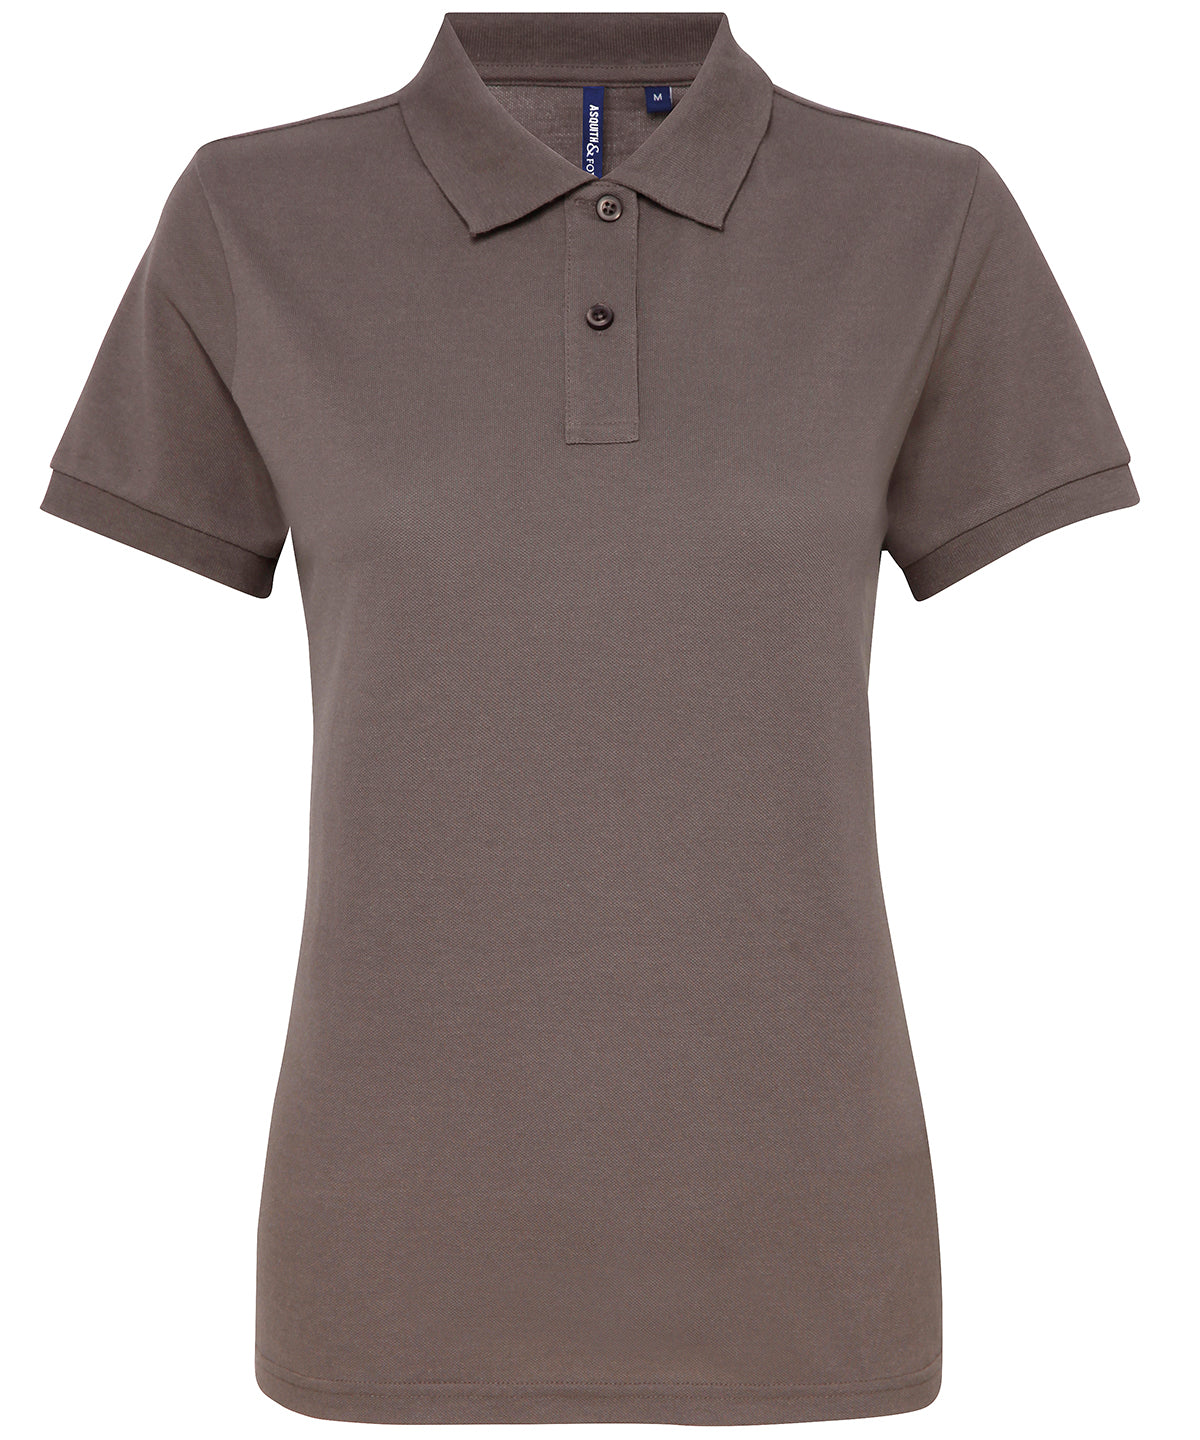 Personalised Polo Shirts - Dark Grey Asquith & Fox Women’s polycotton blend polo